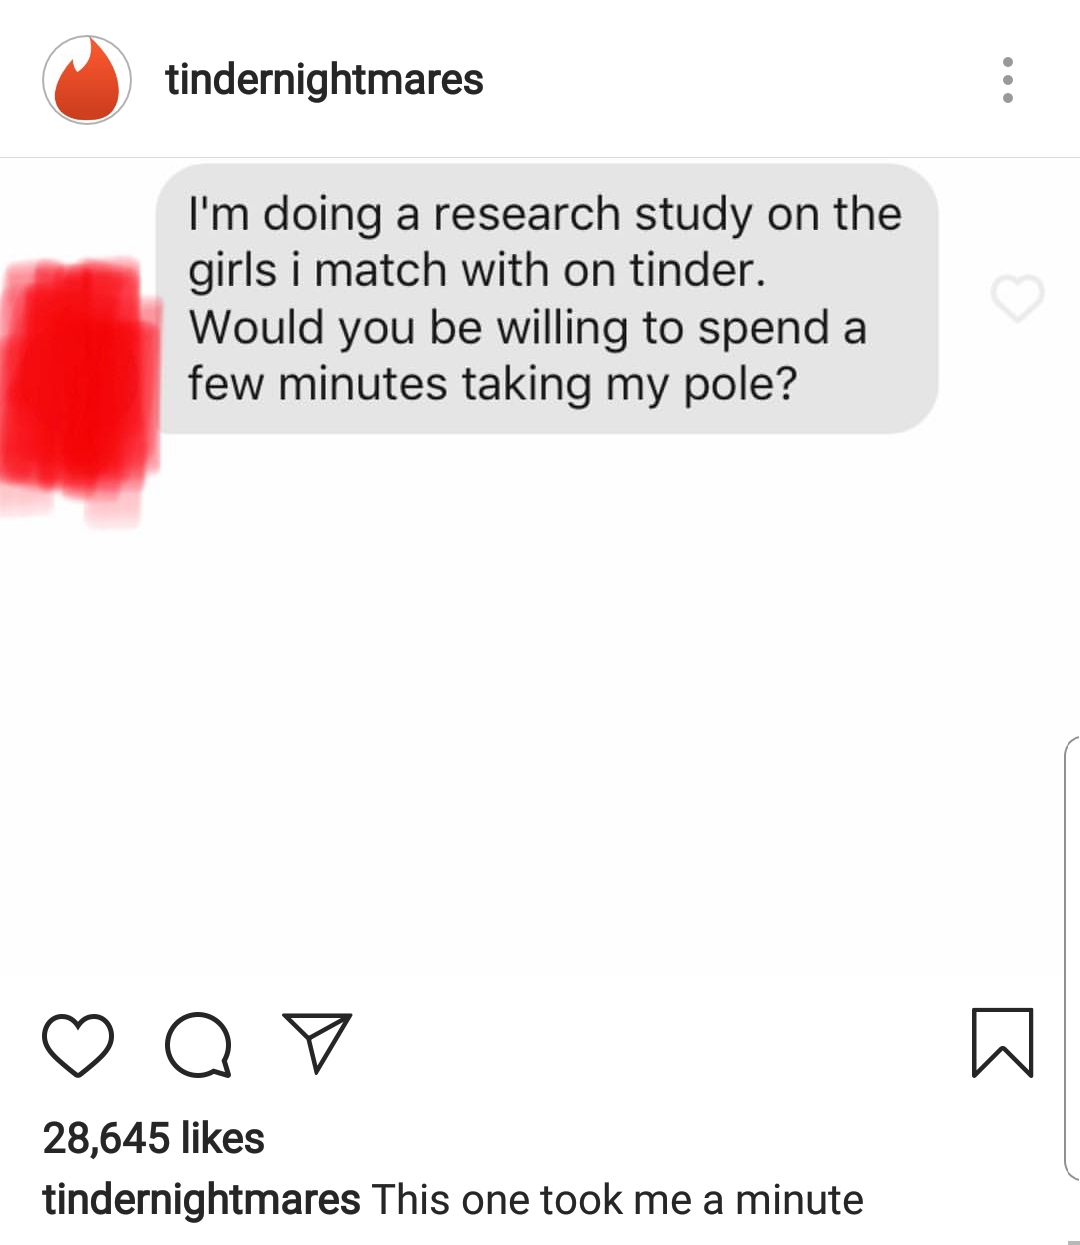 memes - point - tindernightmares I'm doing a research study on the girls i match with on tinder. Would you be willing to spend a few minutes taking my pole? Q 28,645 tindernightmares This one took me a minute